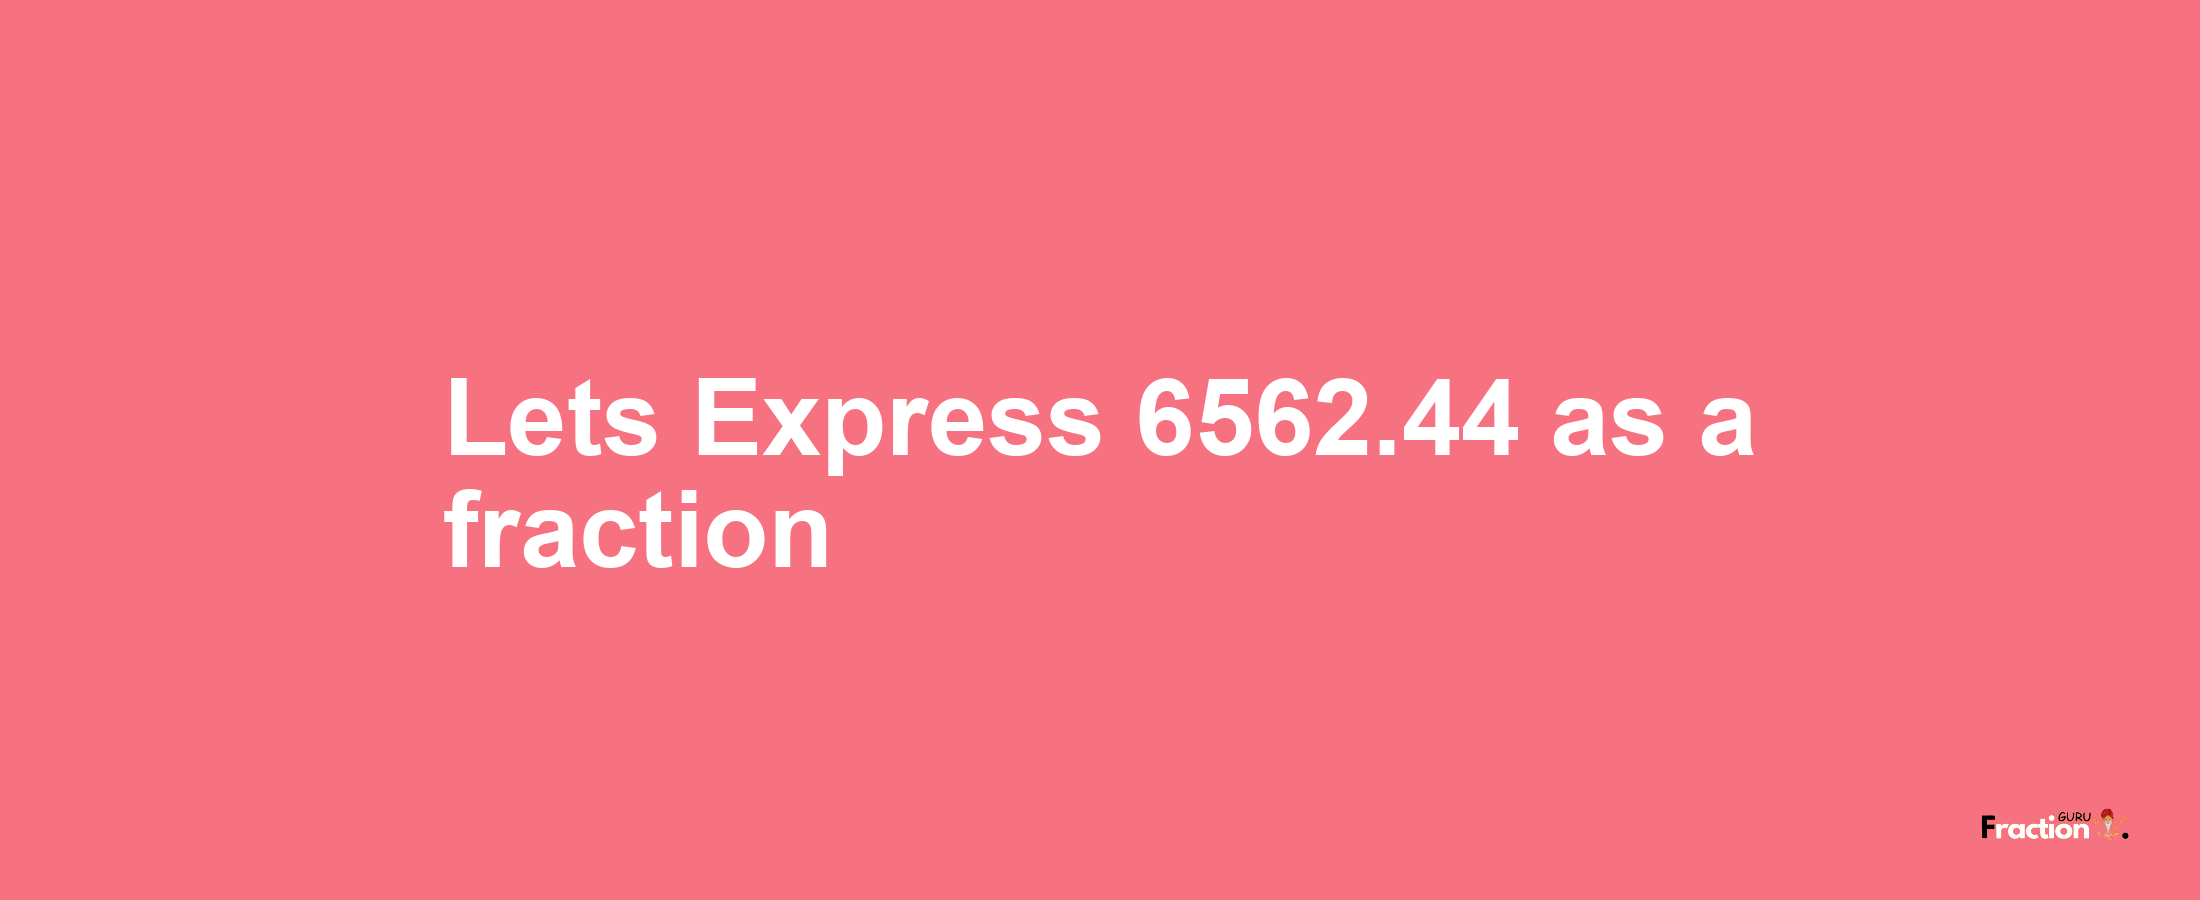 Lets Express 6562.44 as afraction